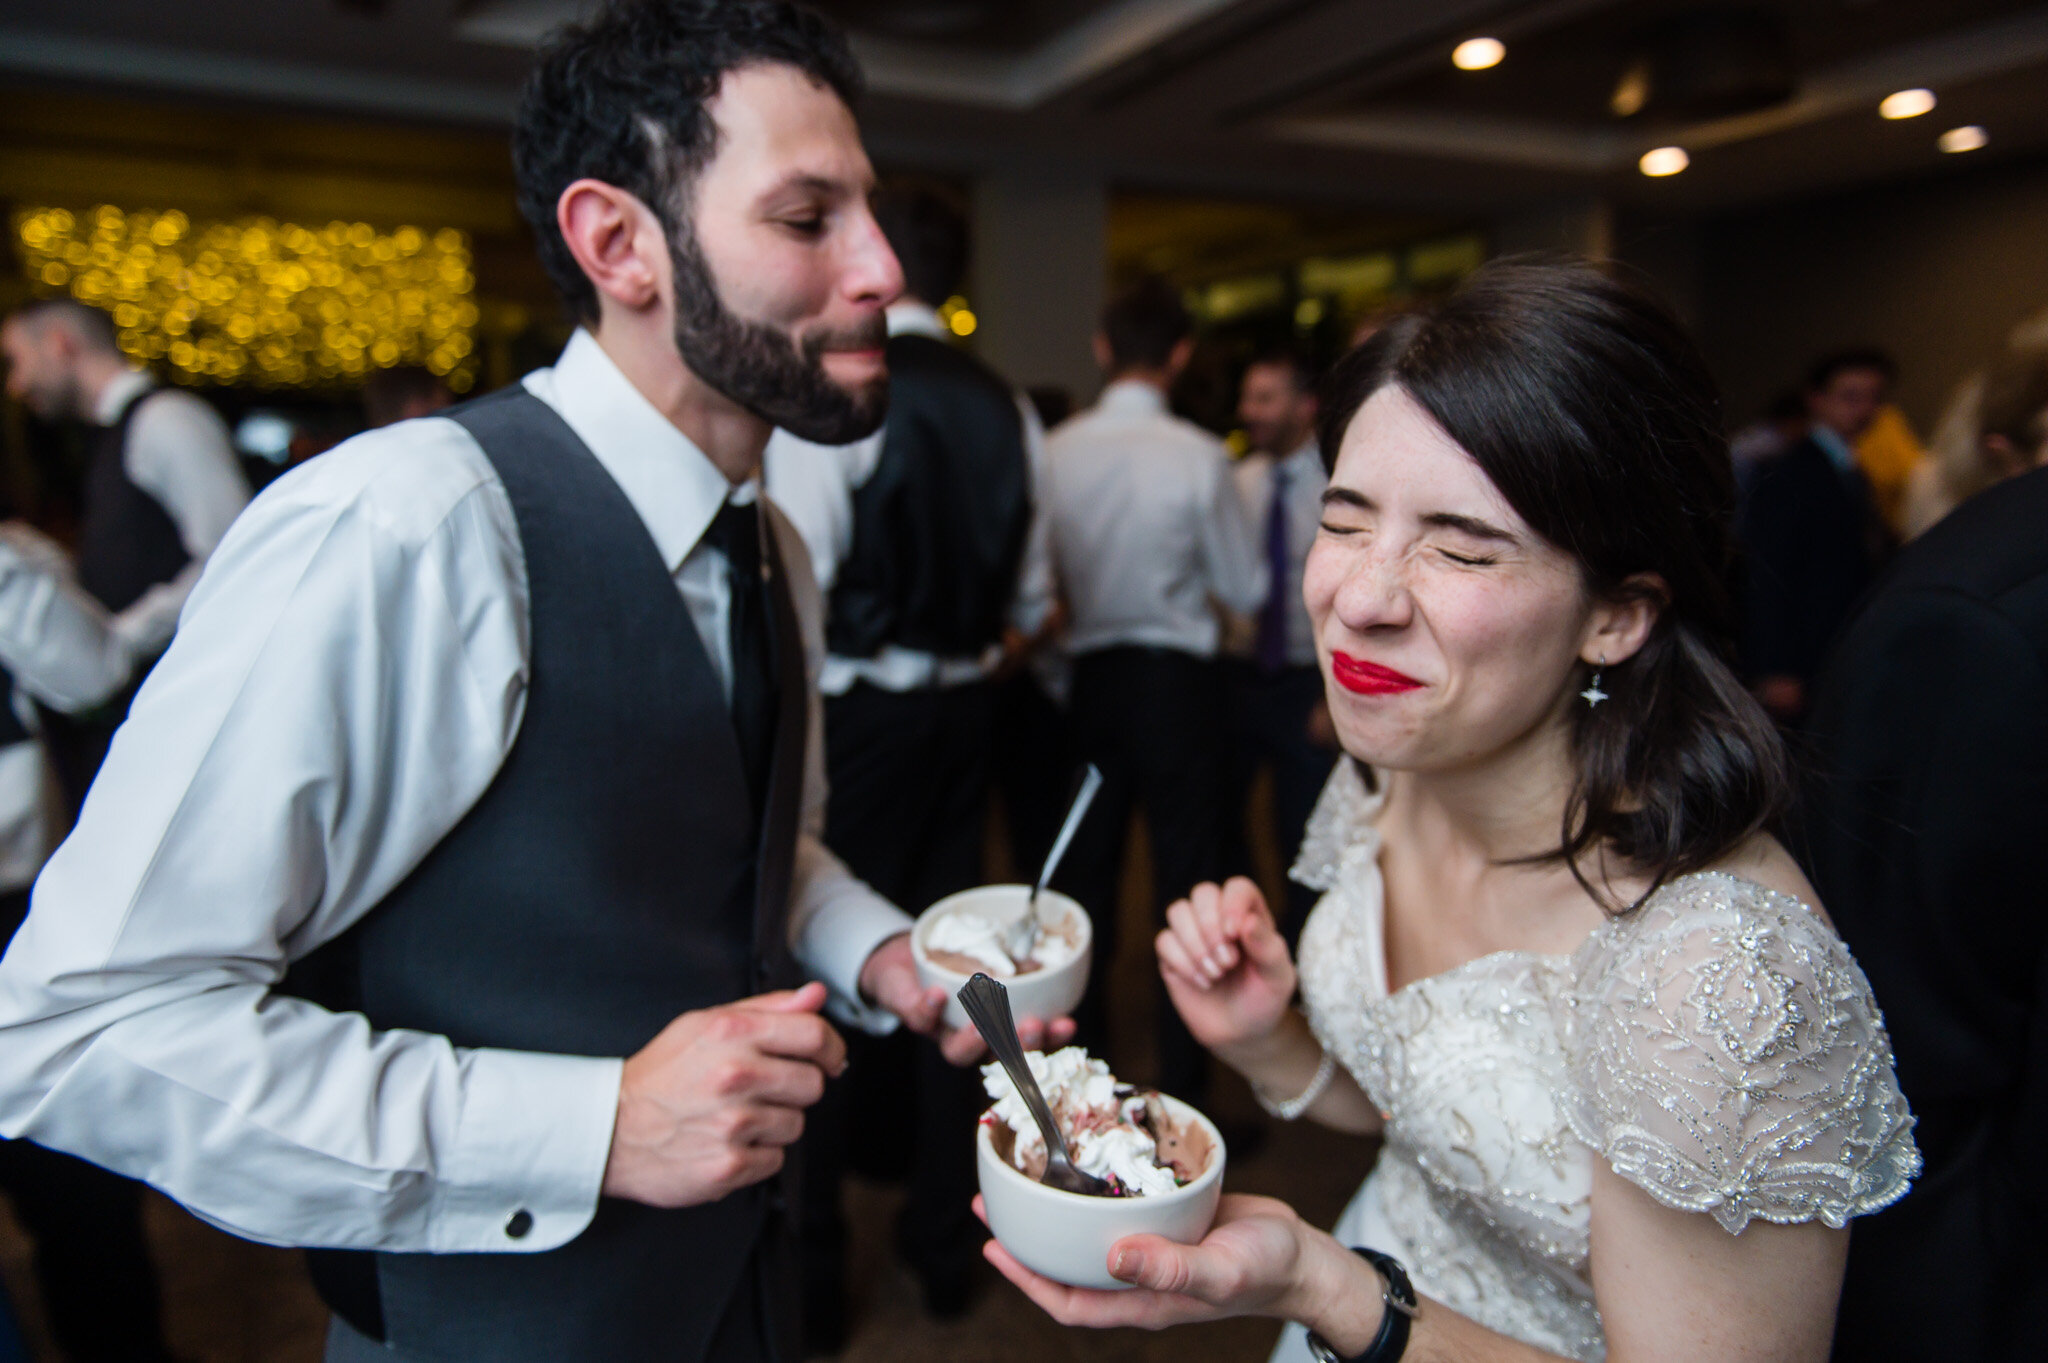 The bride and groom enjoy Sundae's together at their wedding reception